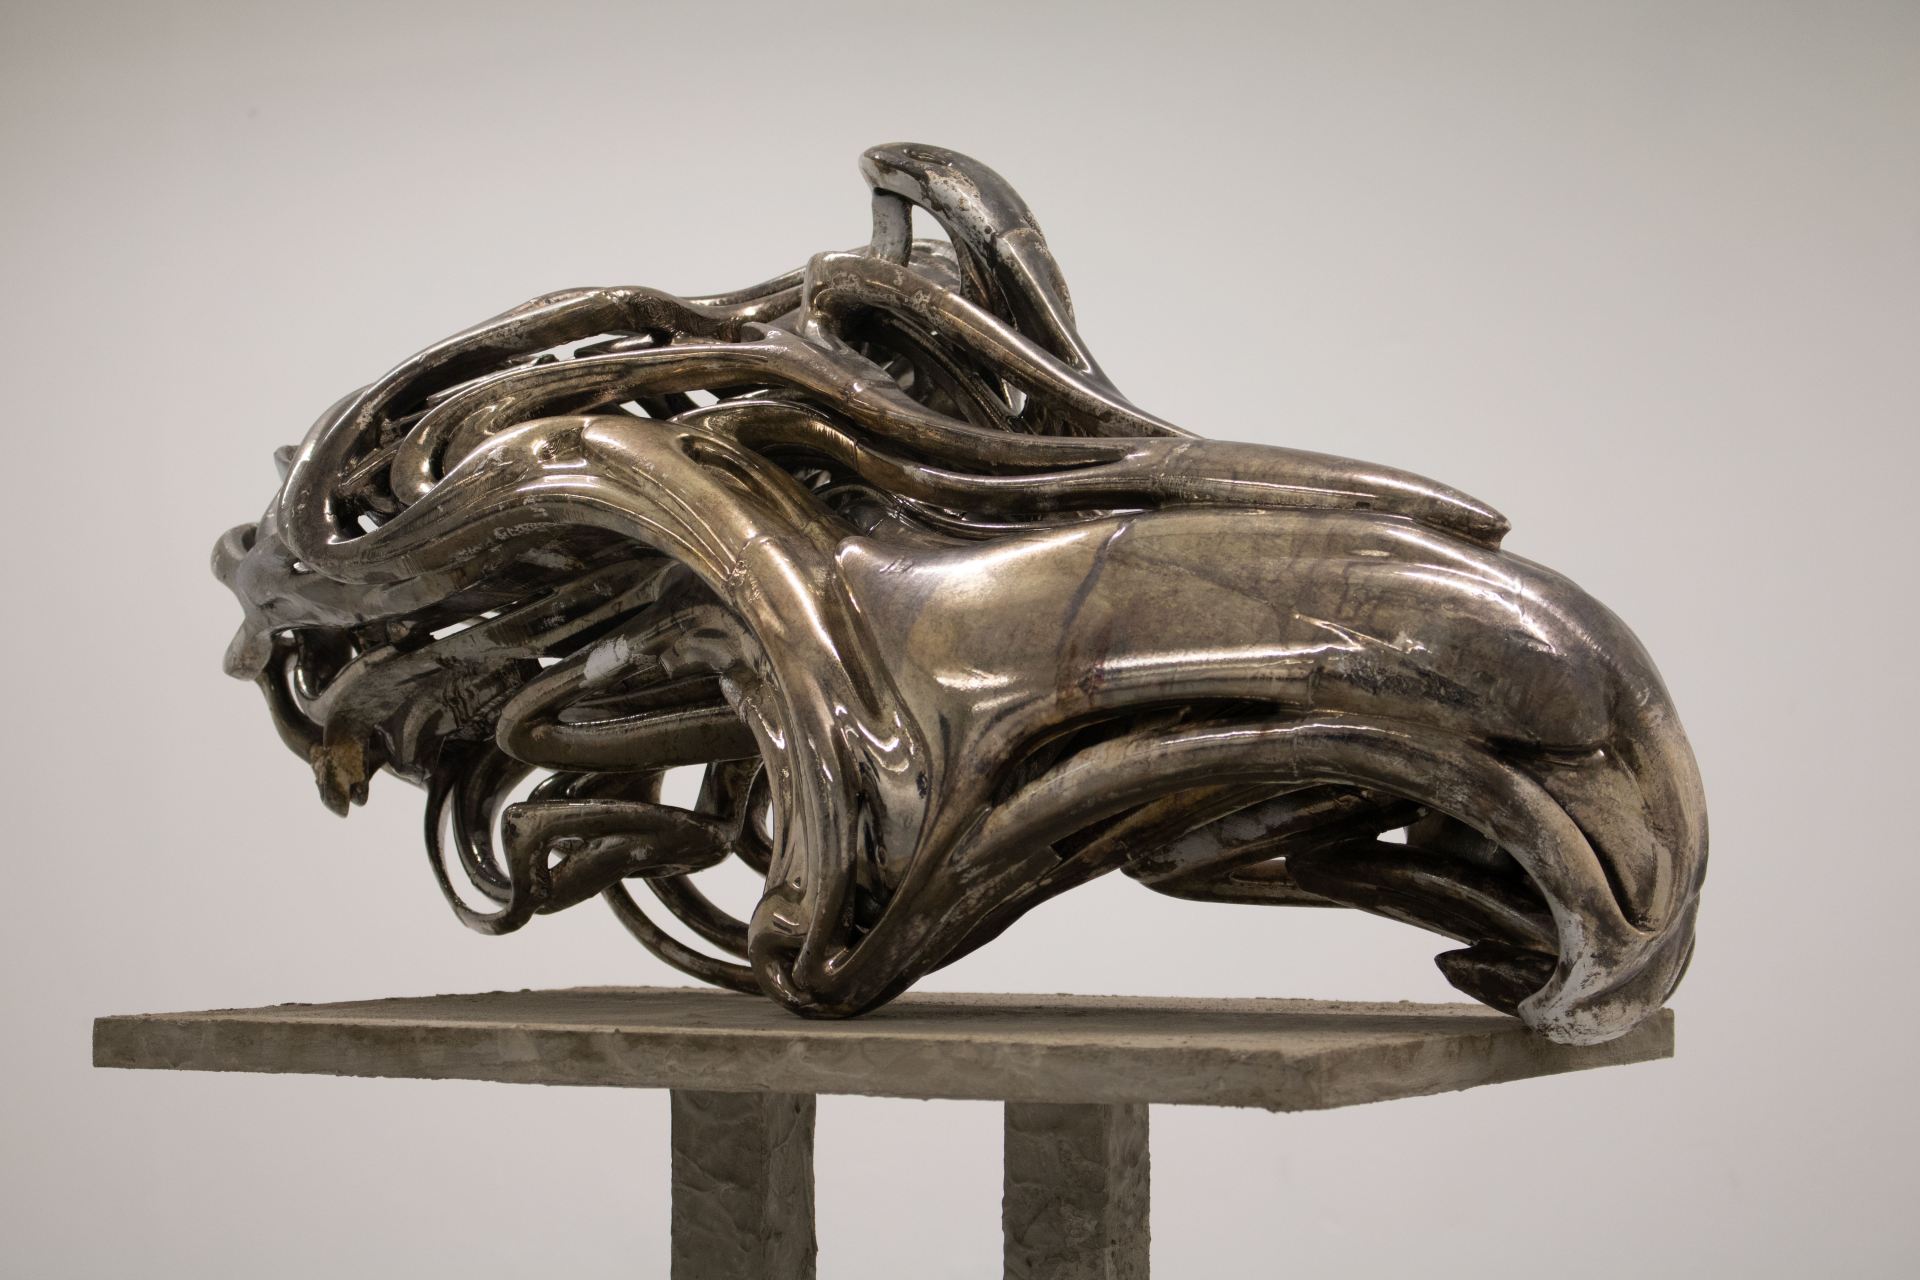 An image of a curved and abstract bronze sculpture.